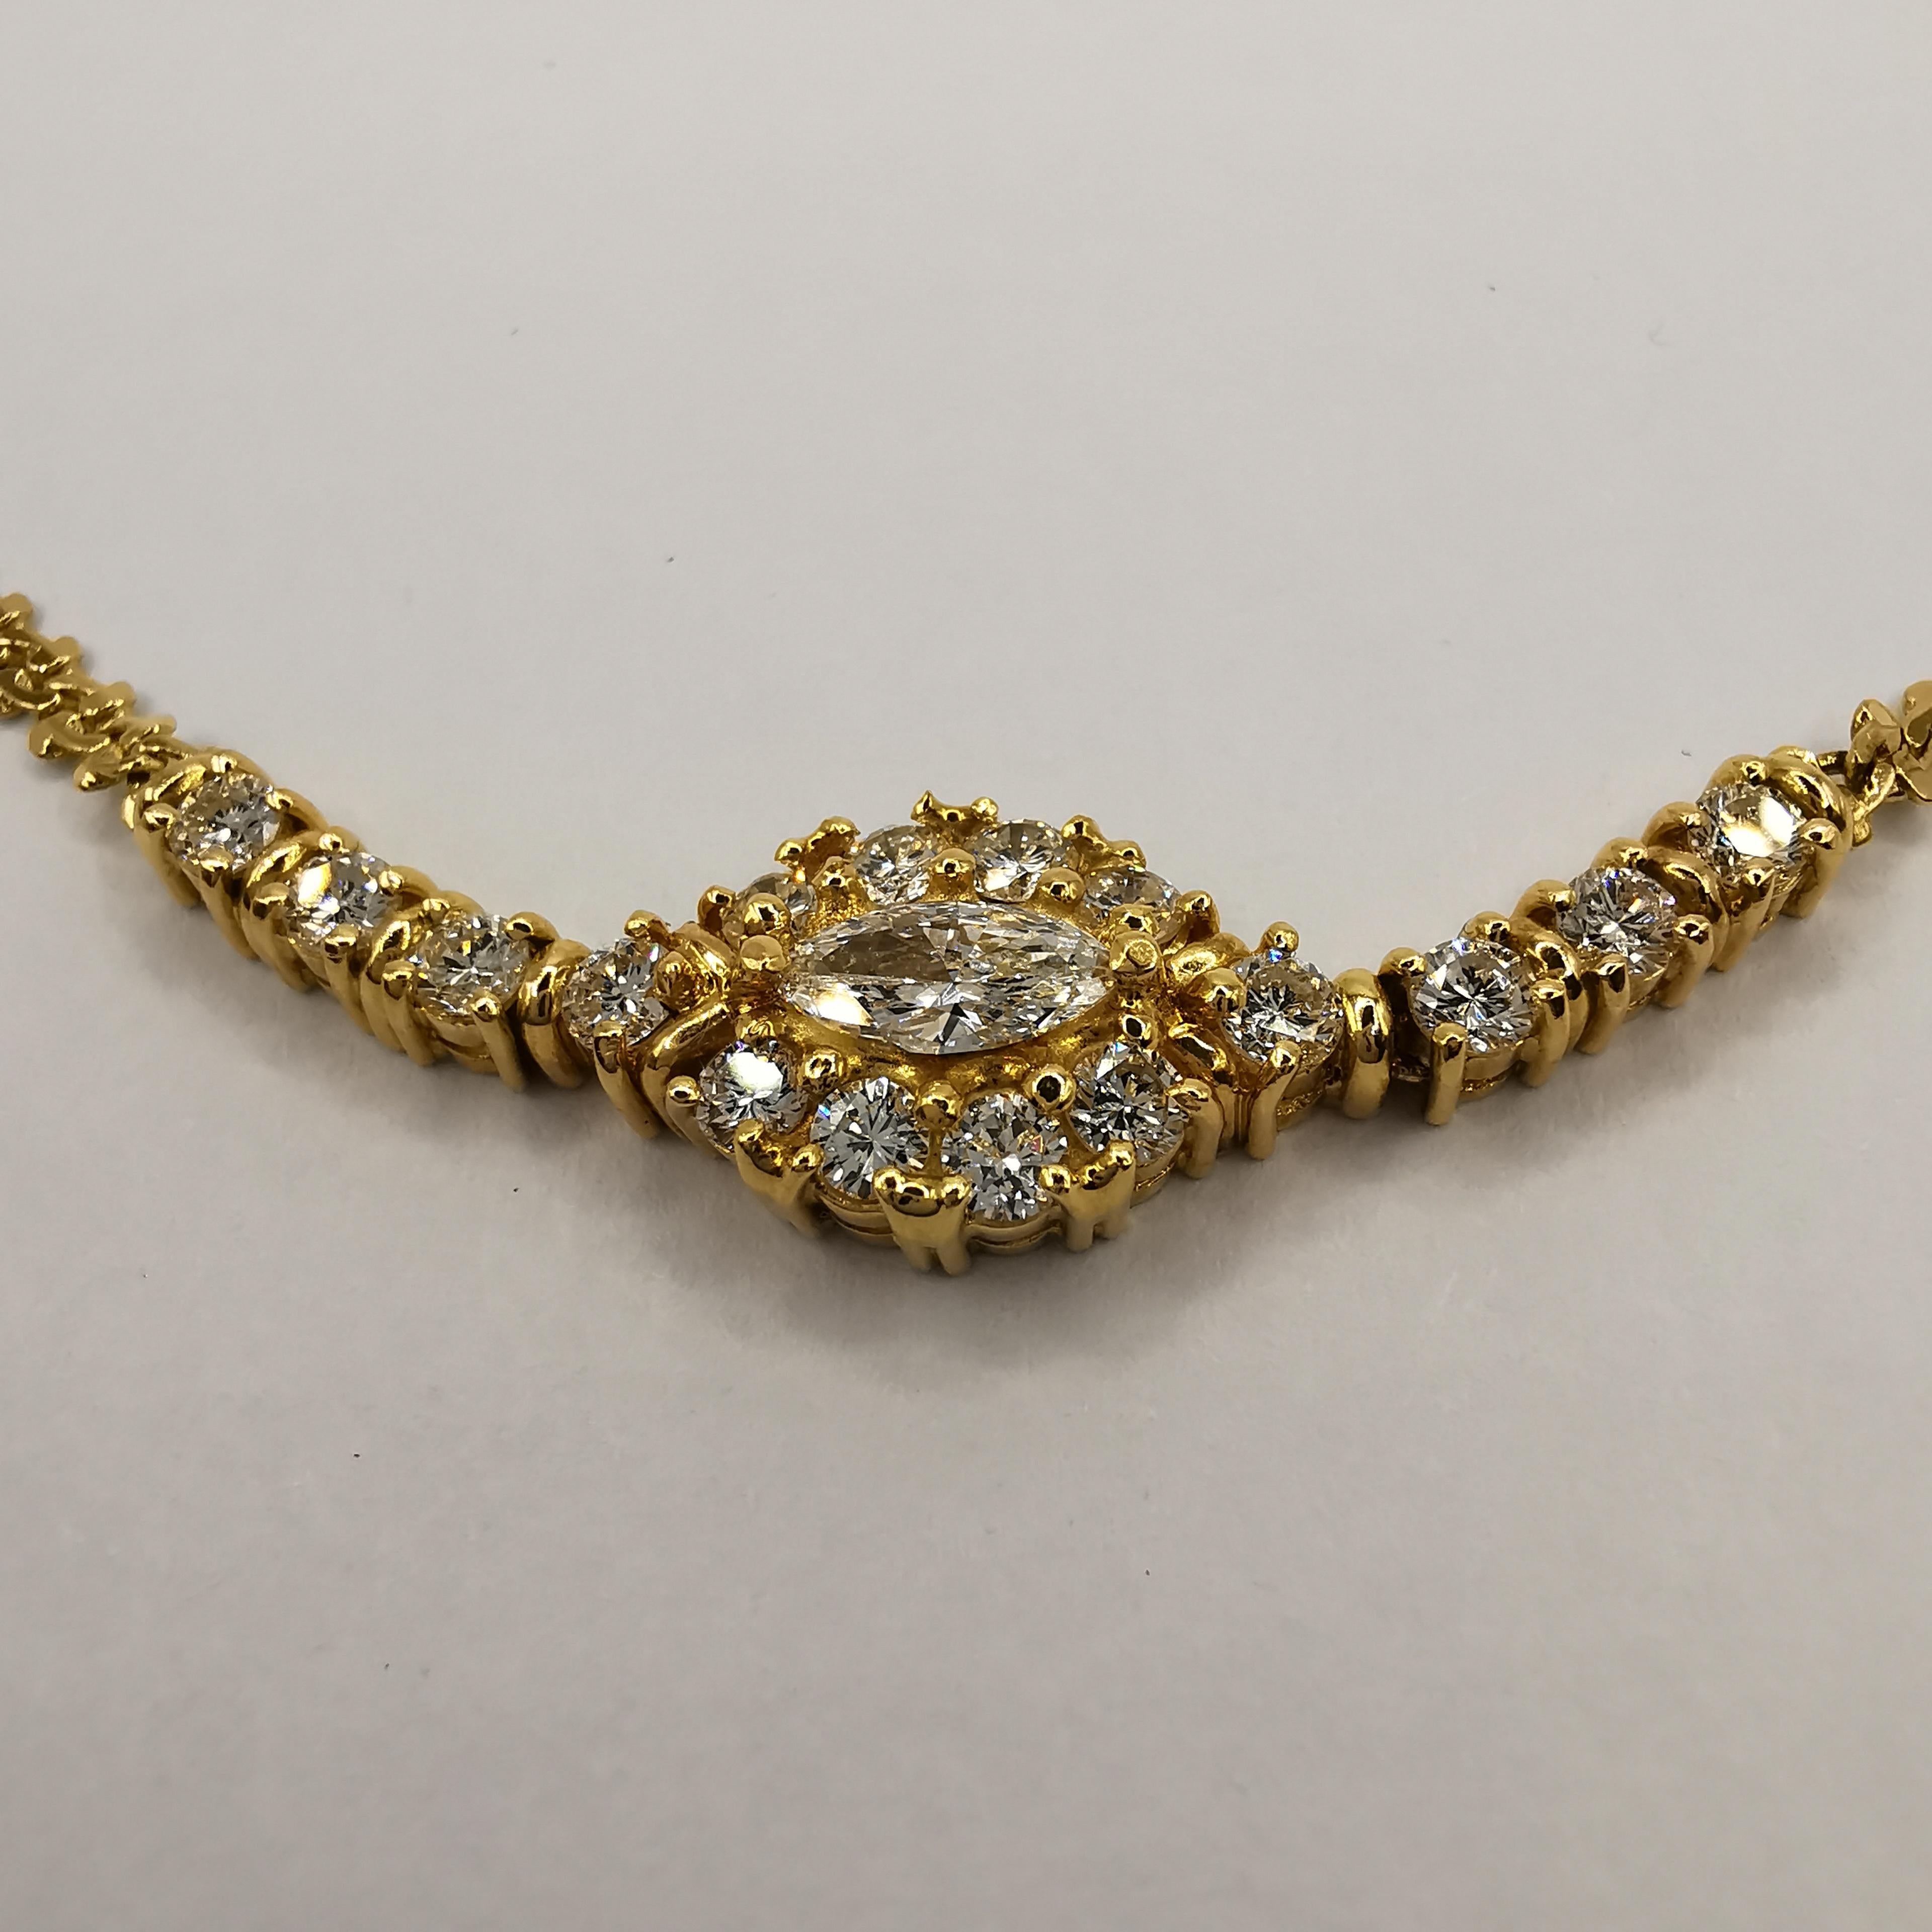 This stunning 112 carat marquise diamond choker necklace is the perfect accessory for any special occasion. The centerpiece of the necklace features a single, sparkling marquise cut diamond weighing 0.26 carats, surrounded by 16 brilliant round cut